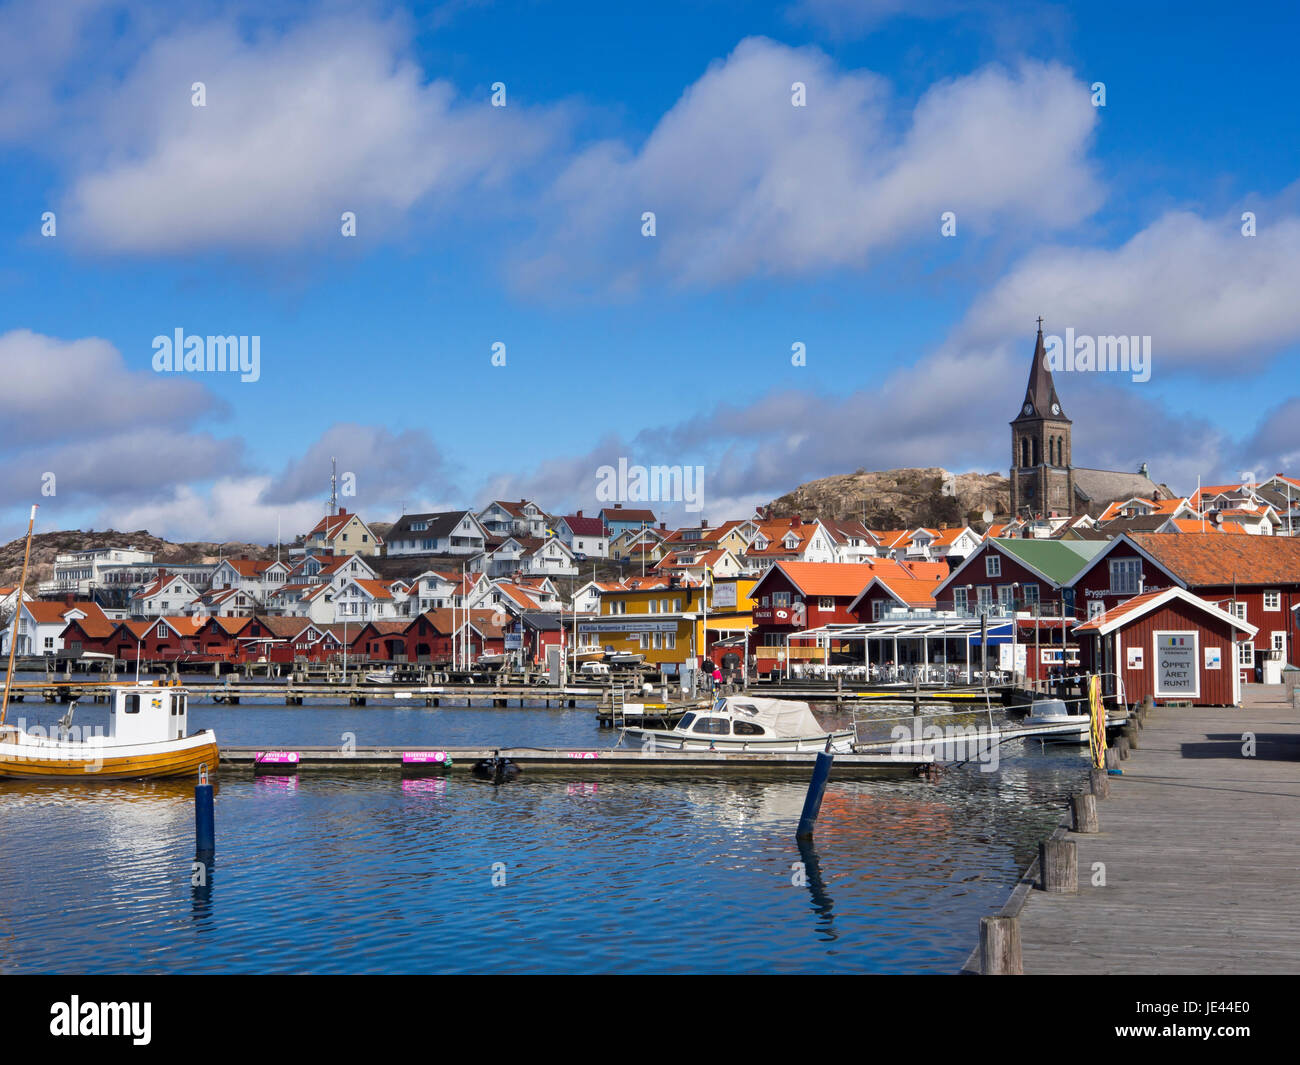 The small town of Fjallbacka on the west coast of Sweden, a holiday destination Stock Photo